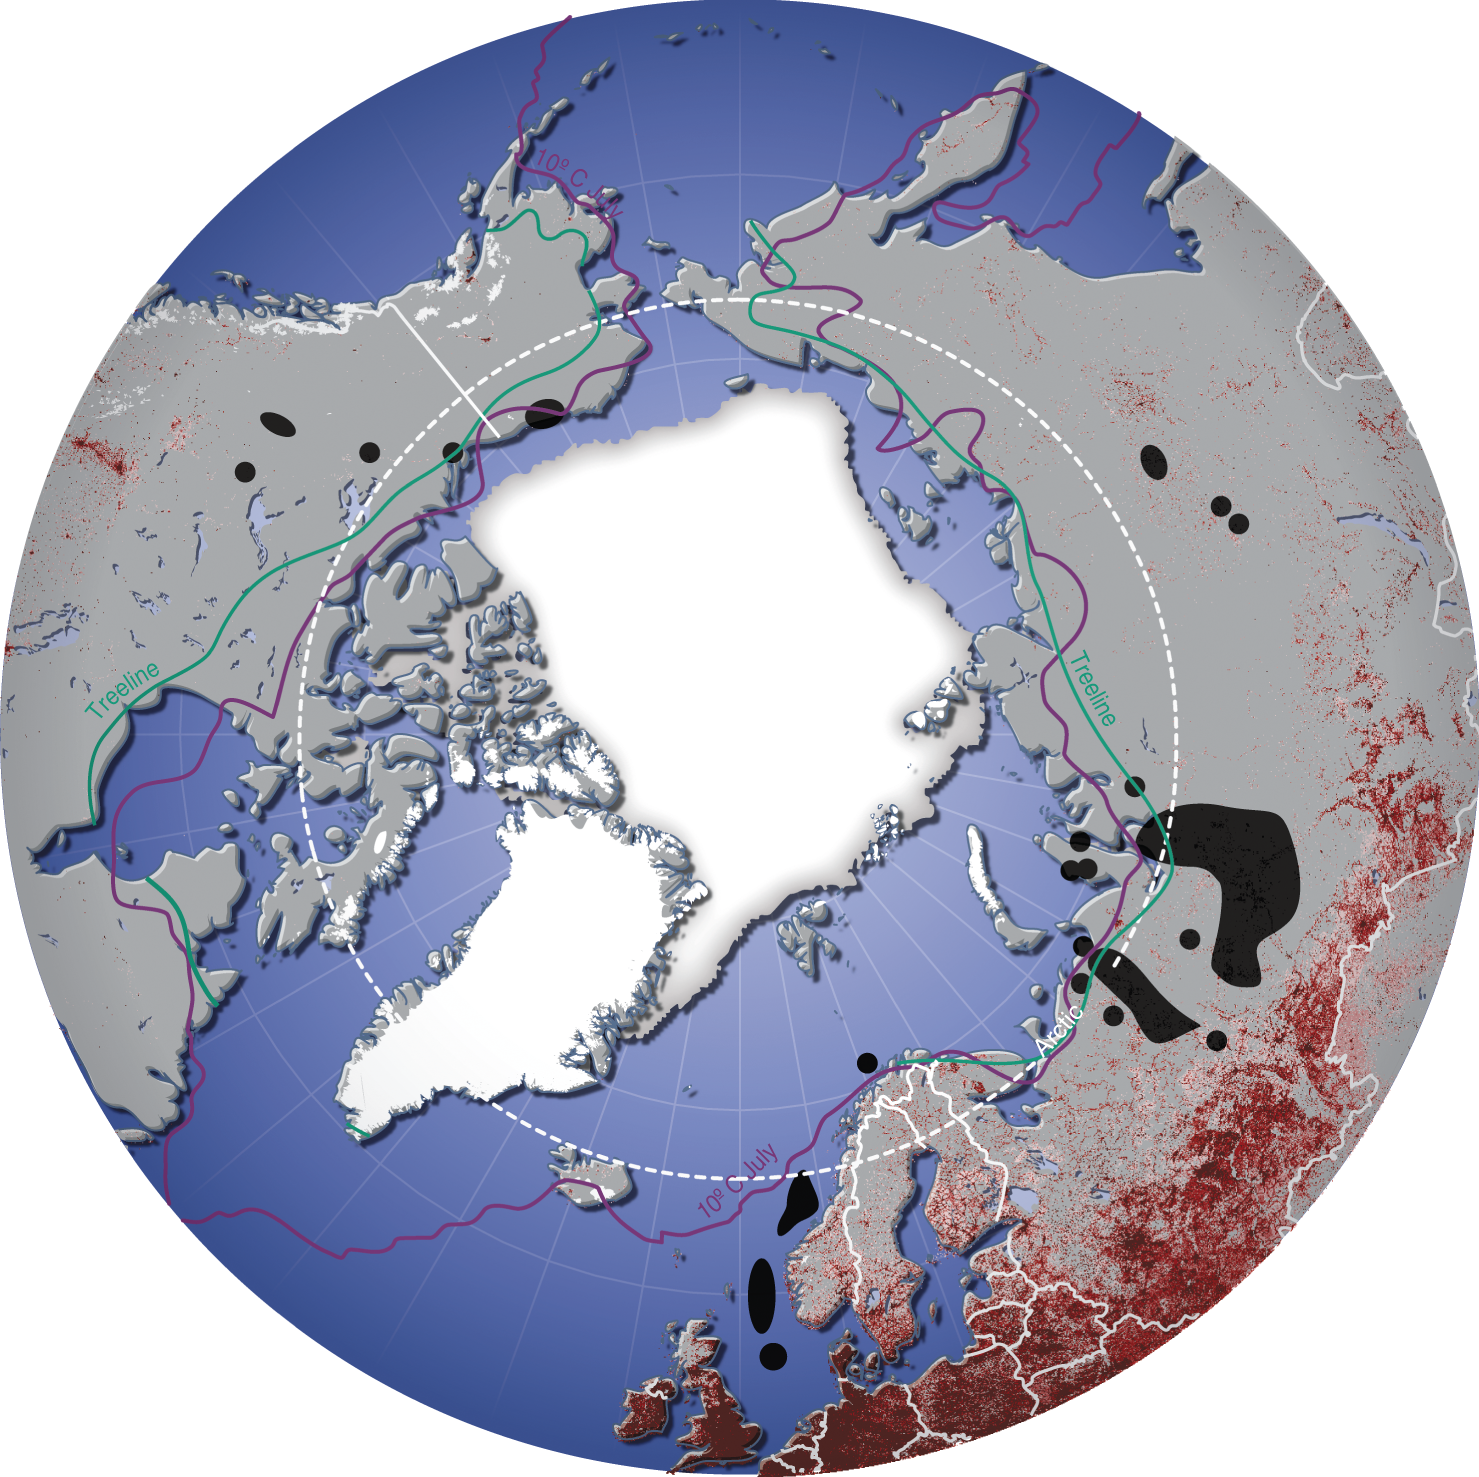 Schematic illustration of a view of the Arctic showing the Arctic Circle and human population density in red and large oil fields in black.